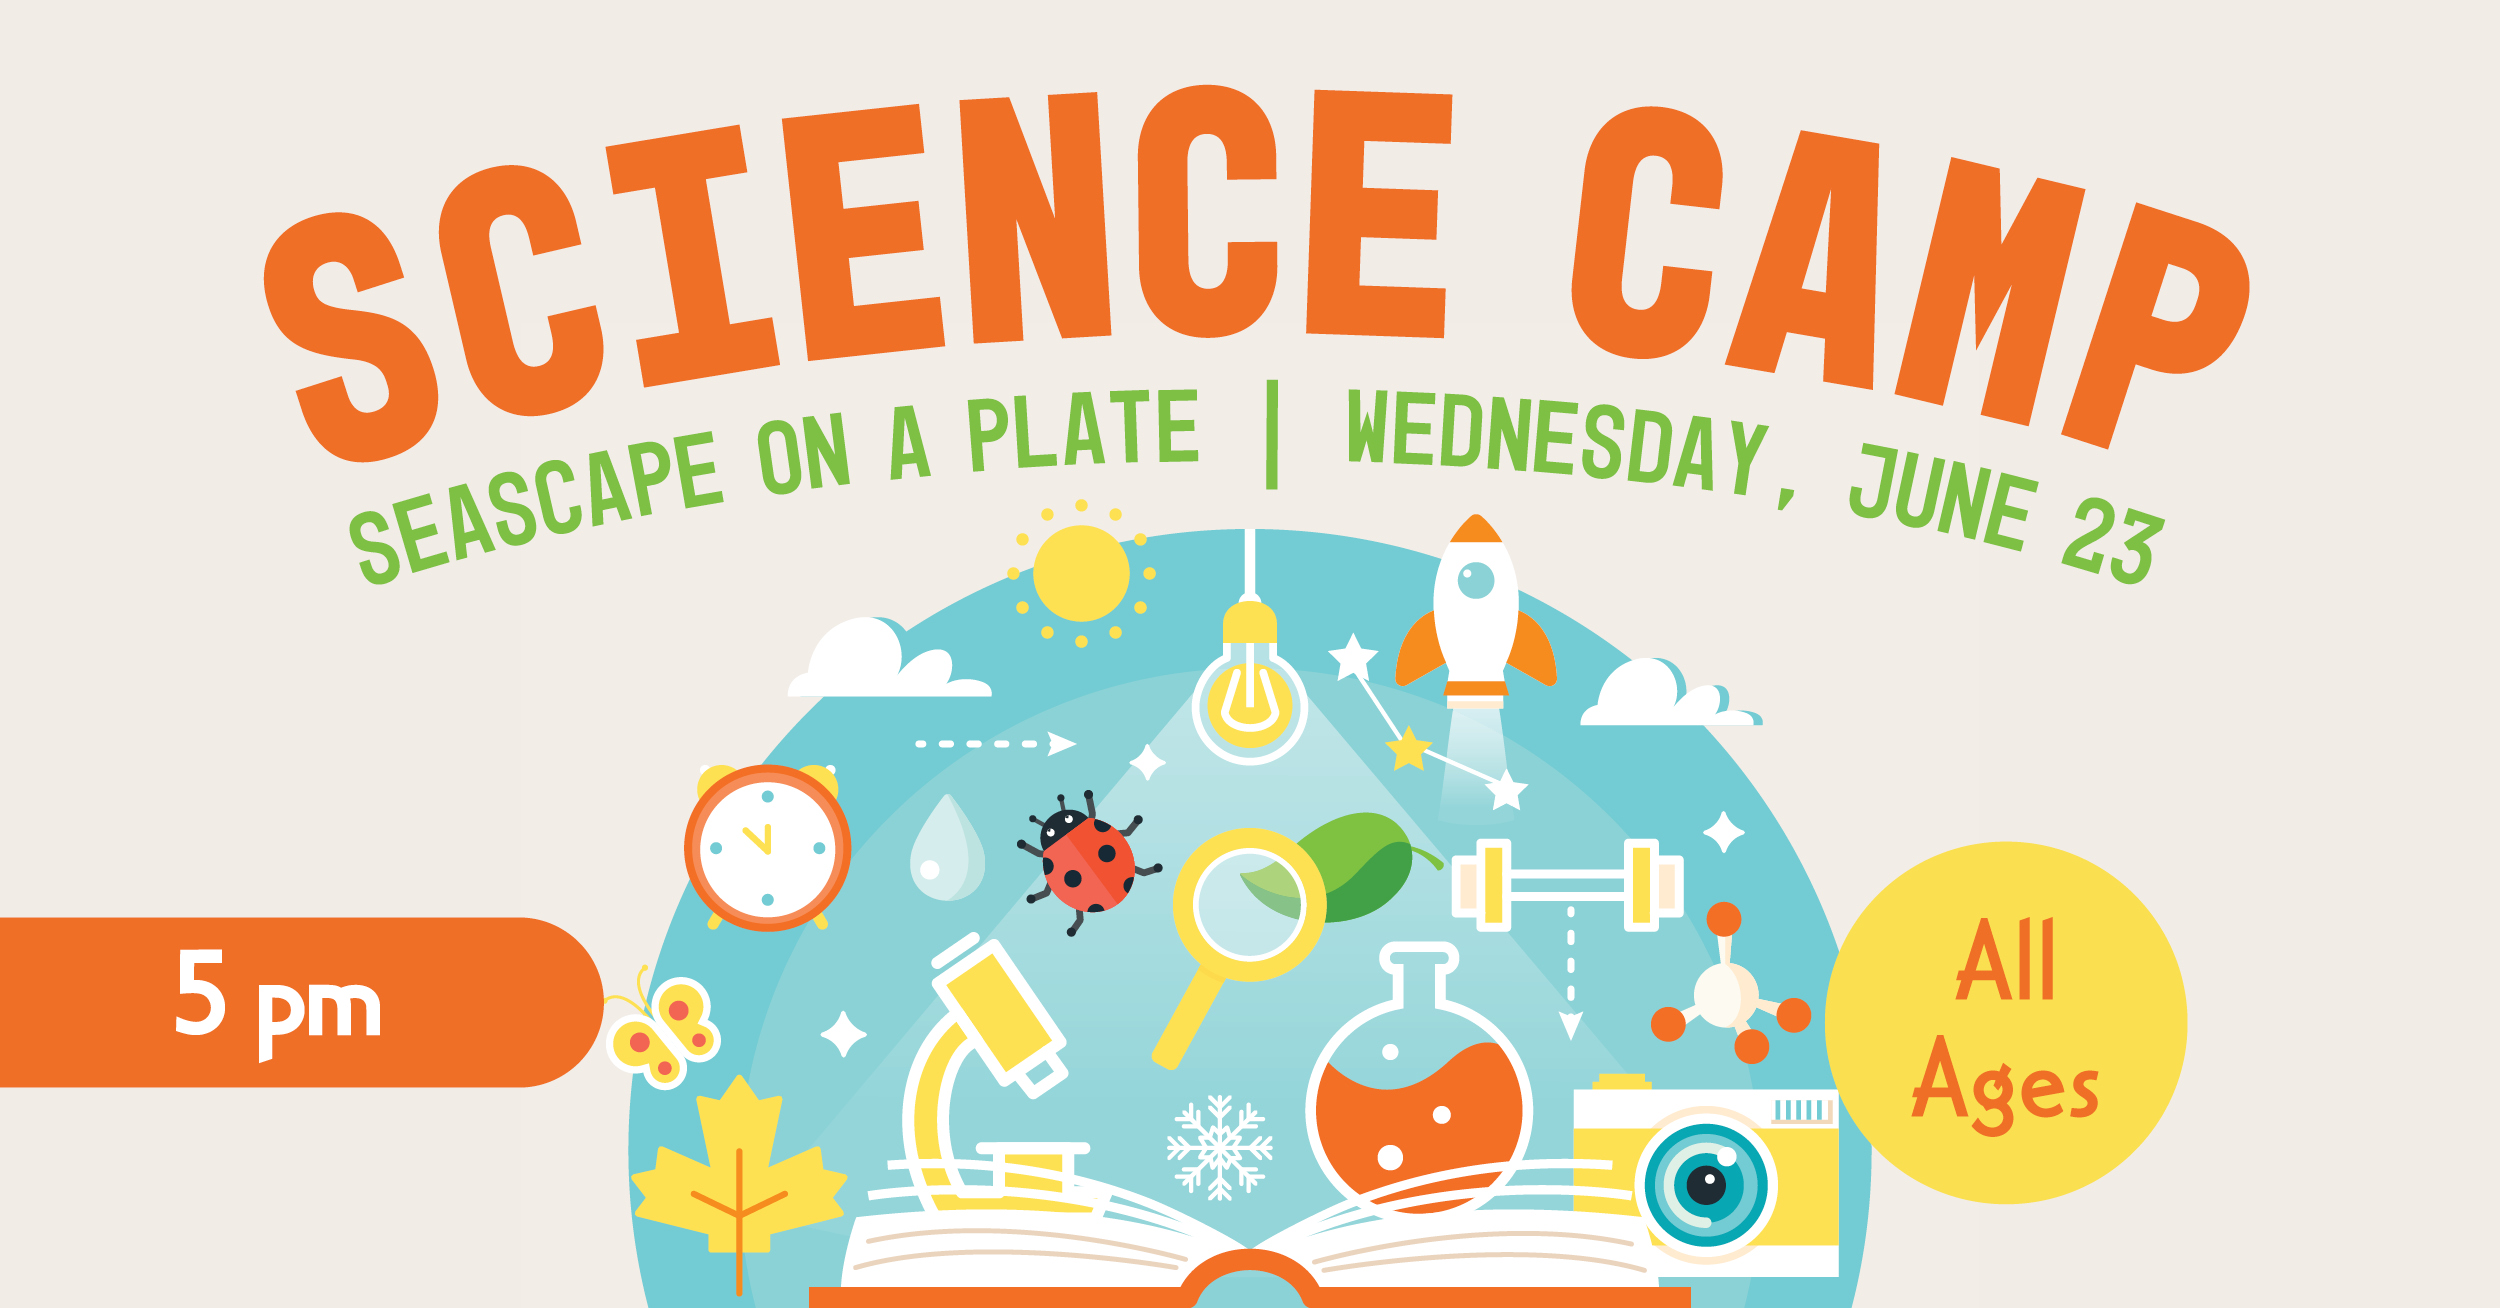 Science Camp: Seascape on a plate. Wednesday, June 23 at 5pm. All Ages